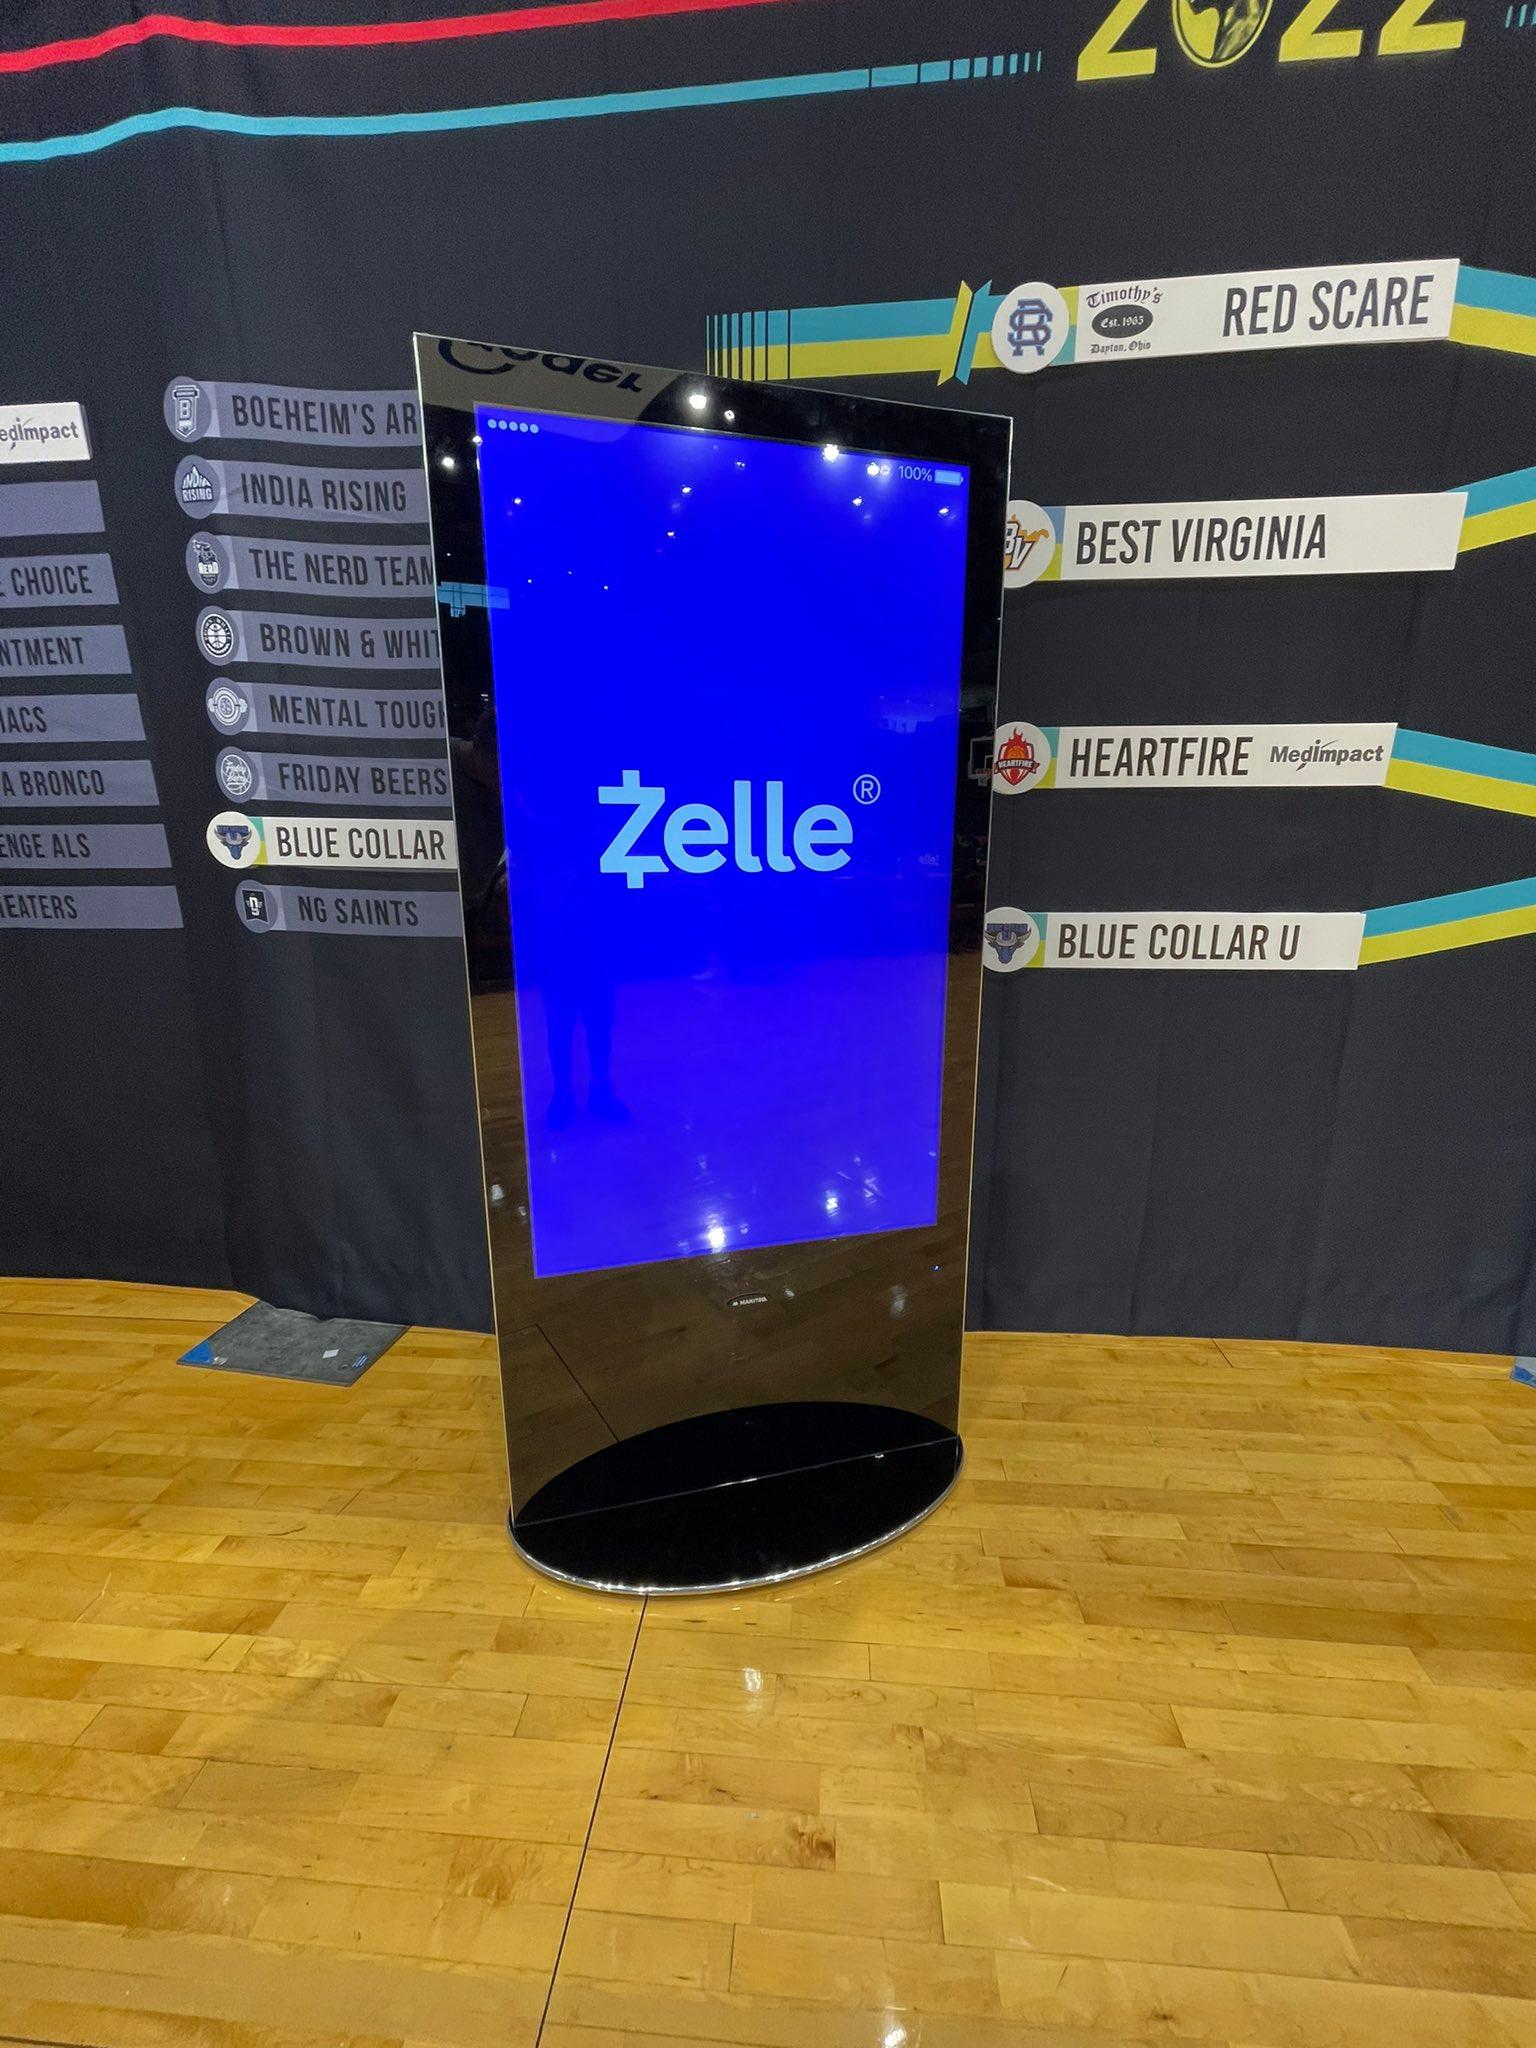 The Zelle logo on a large phone display screen